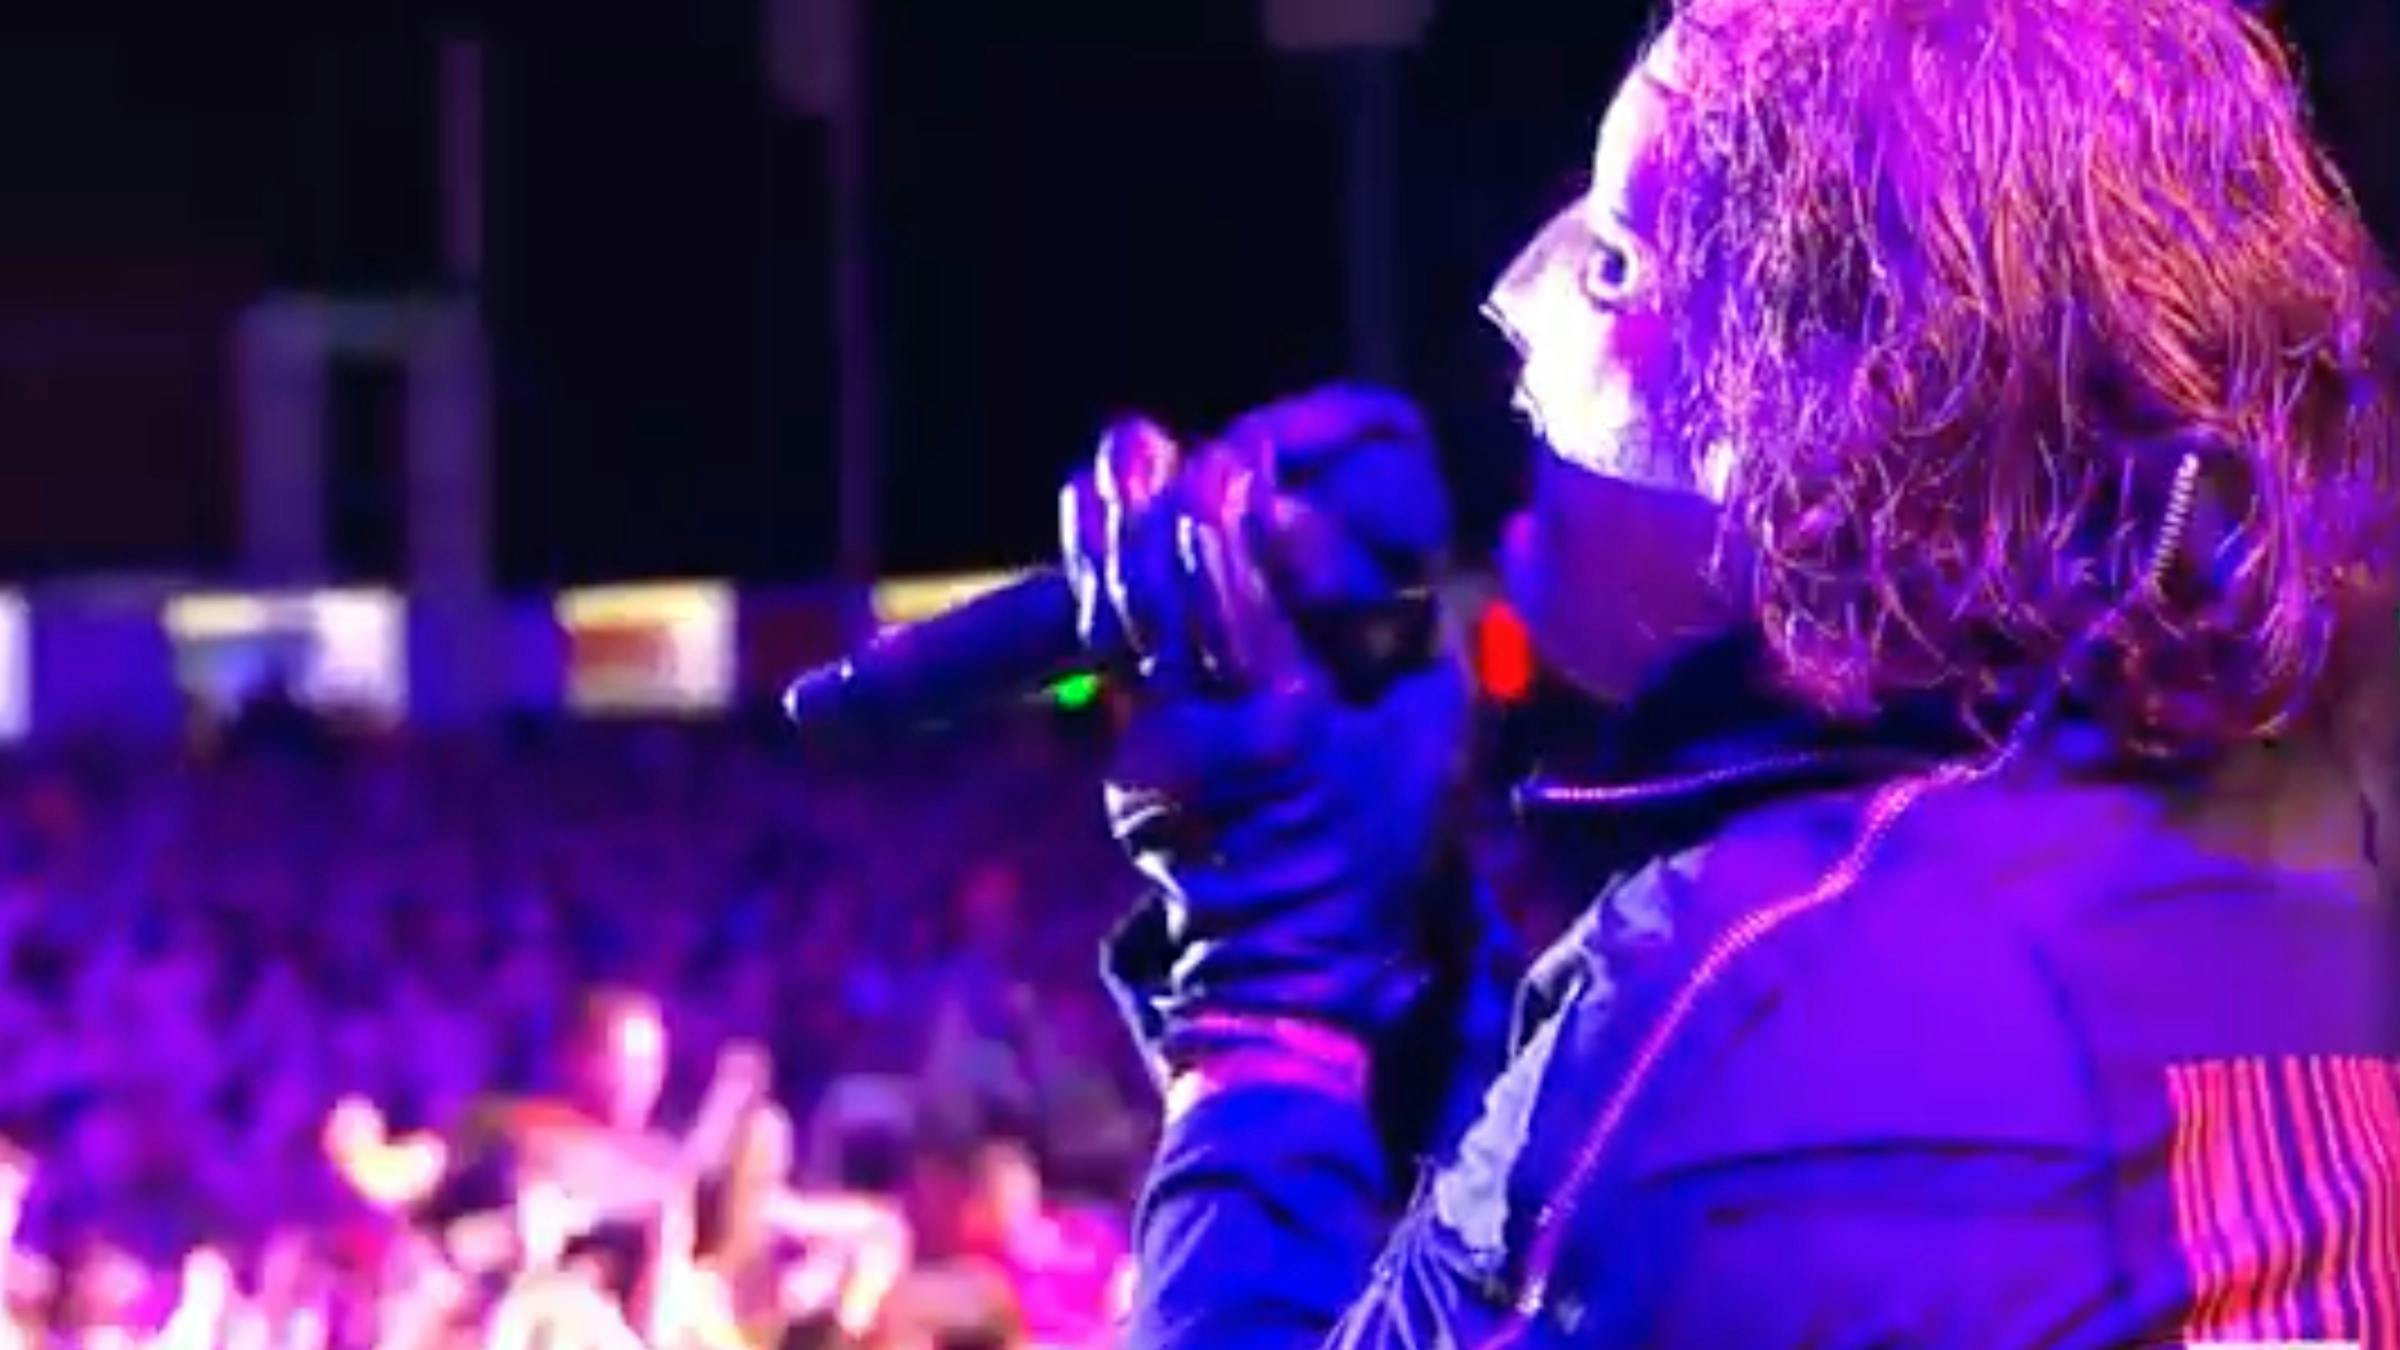 Watch Slipknot's Full Set From This Evening's Rock Am Ring Festival